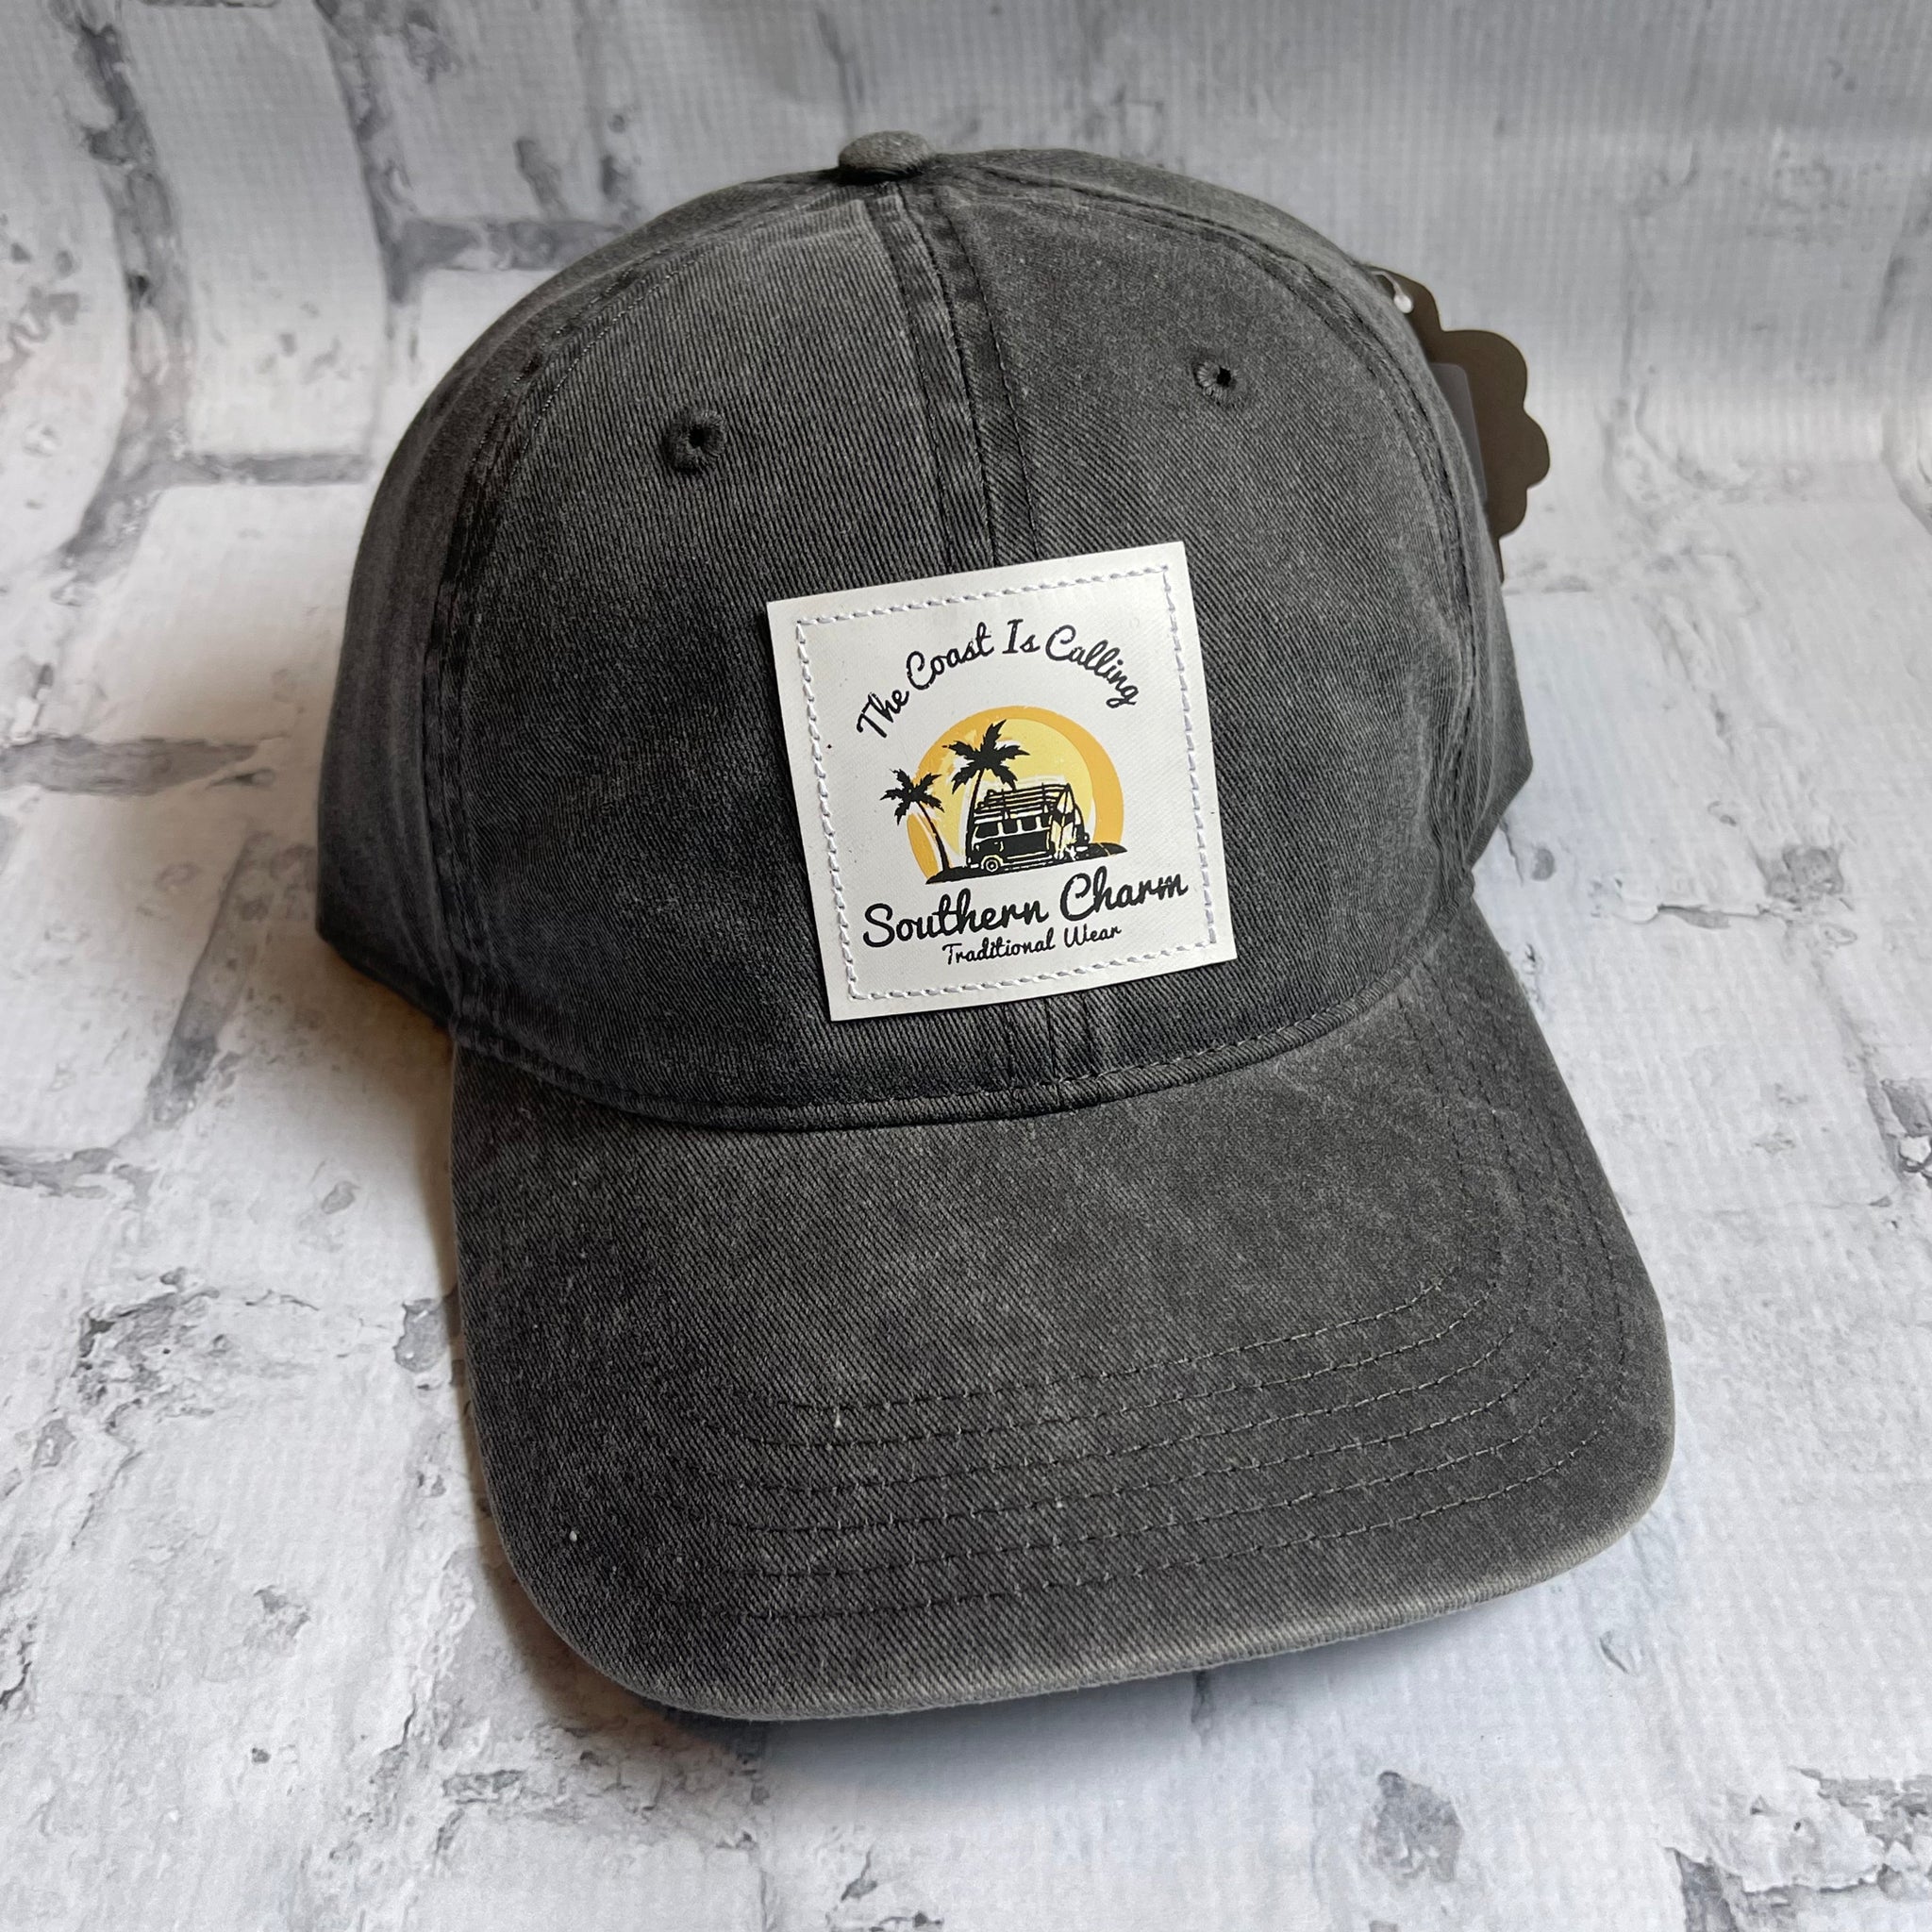 Southern Charm "Coast Is Calling" Hat - Charcoal with Leather Patch - Southern Charm "Shop The Charm"